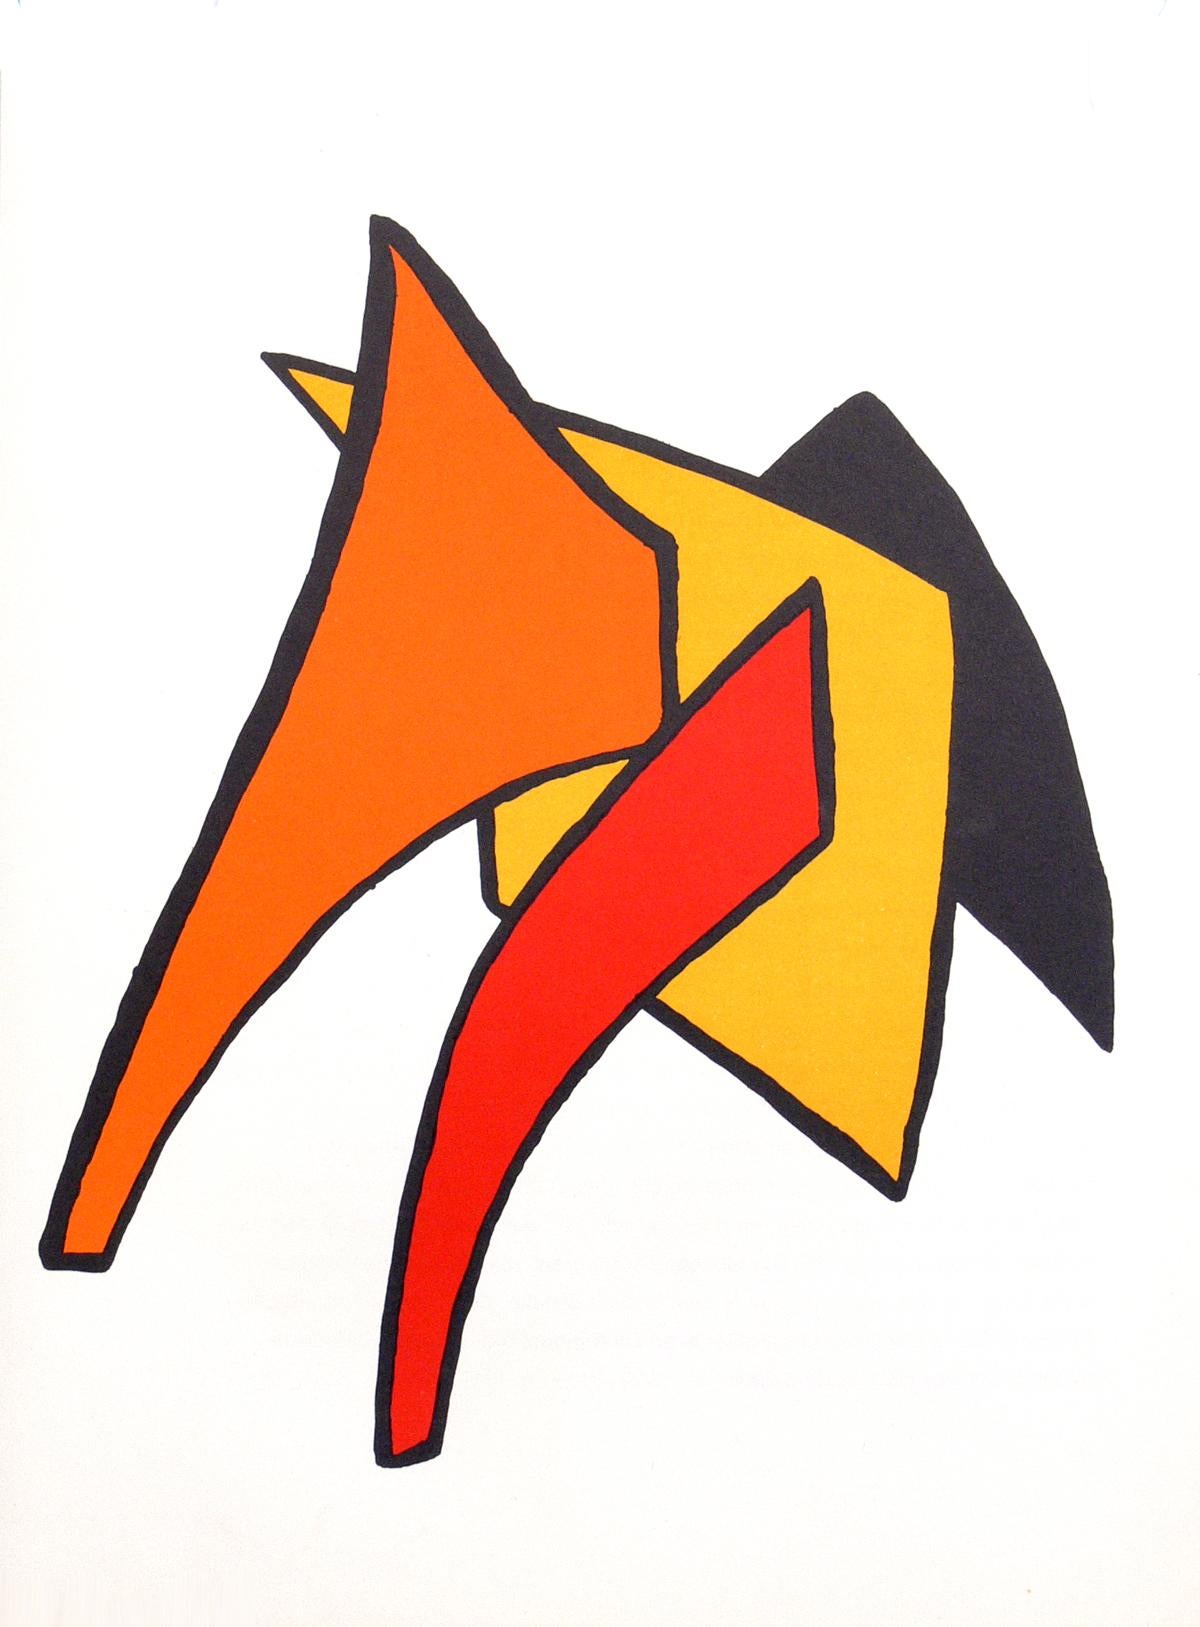 Selection of Alexander Calder color lithographs, France, circa 1960s. We purchased a group of these color lithographs from the estate of a couple that lived in France from 1951-1983. These are most likely from the limited edition folio “Derriere Le